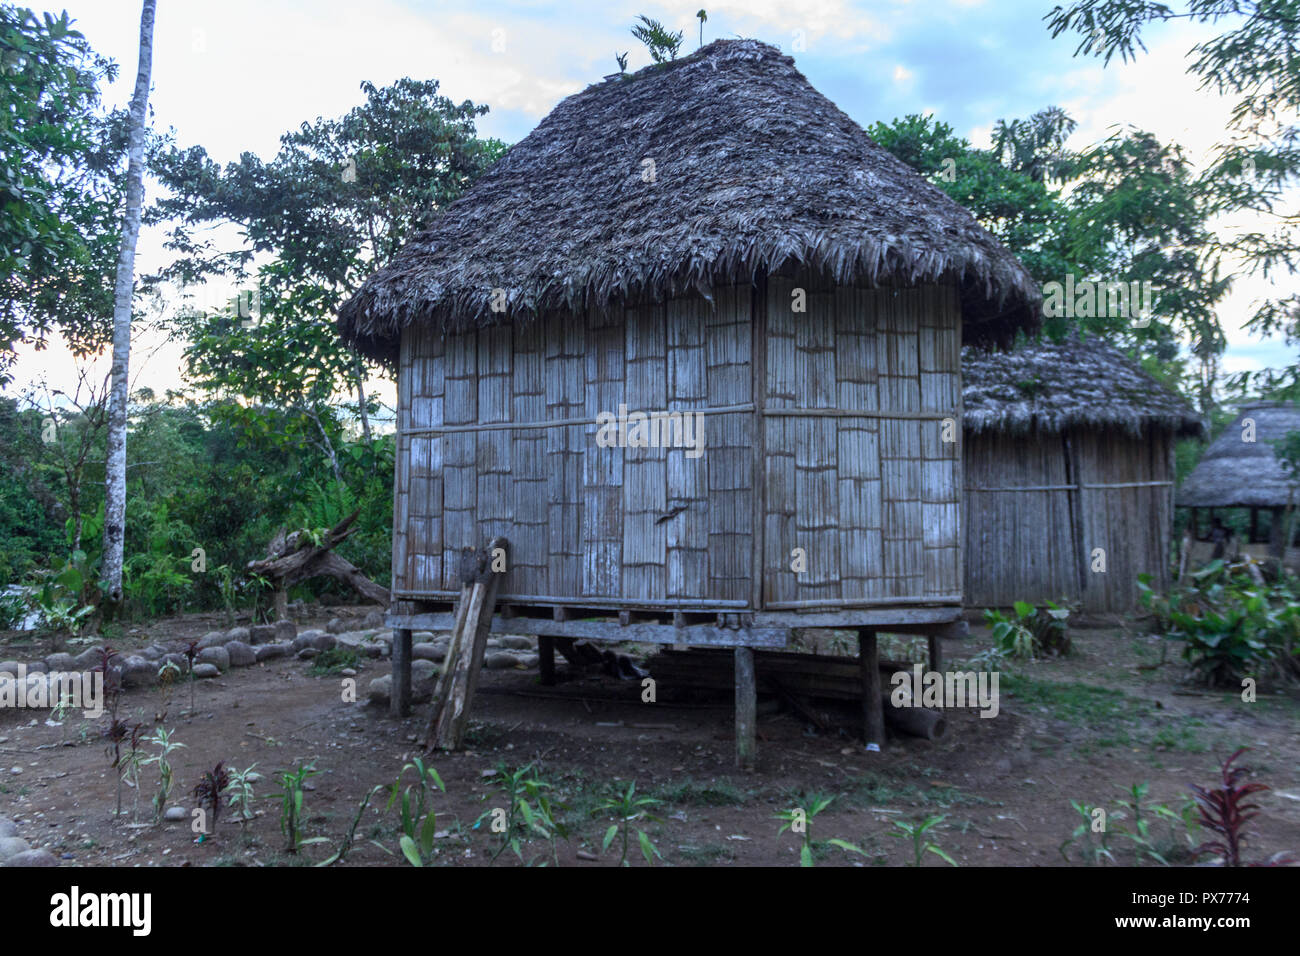 Amazon Hut High Resolution Stock Photography and Images - Alamy